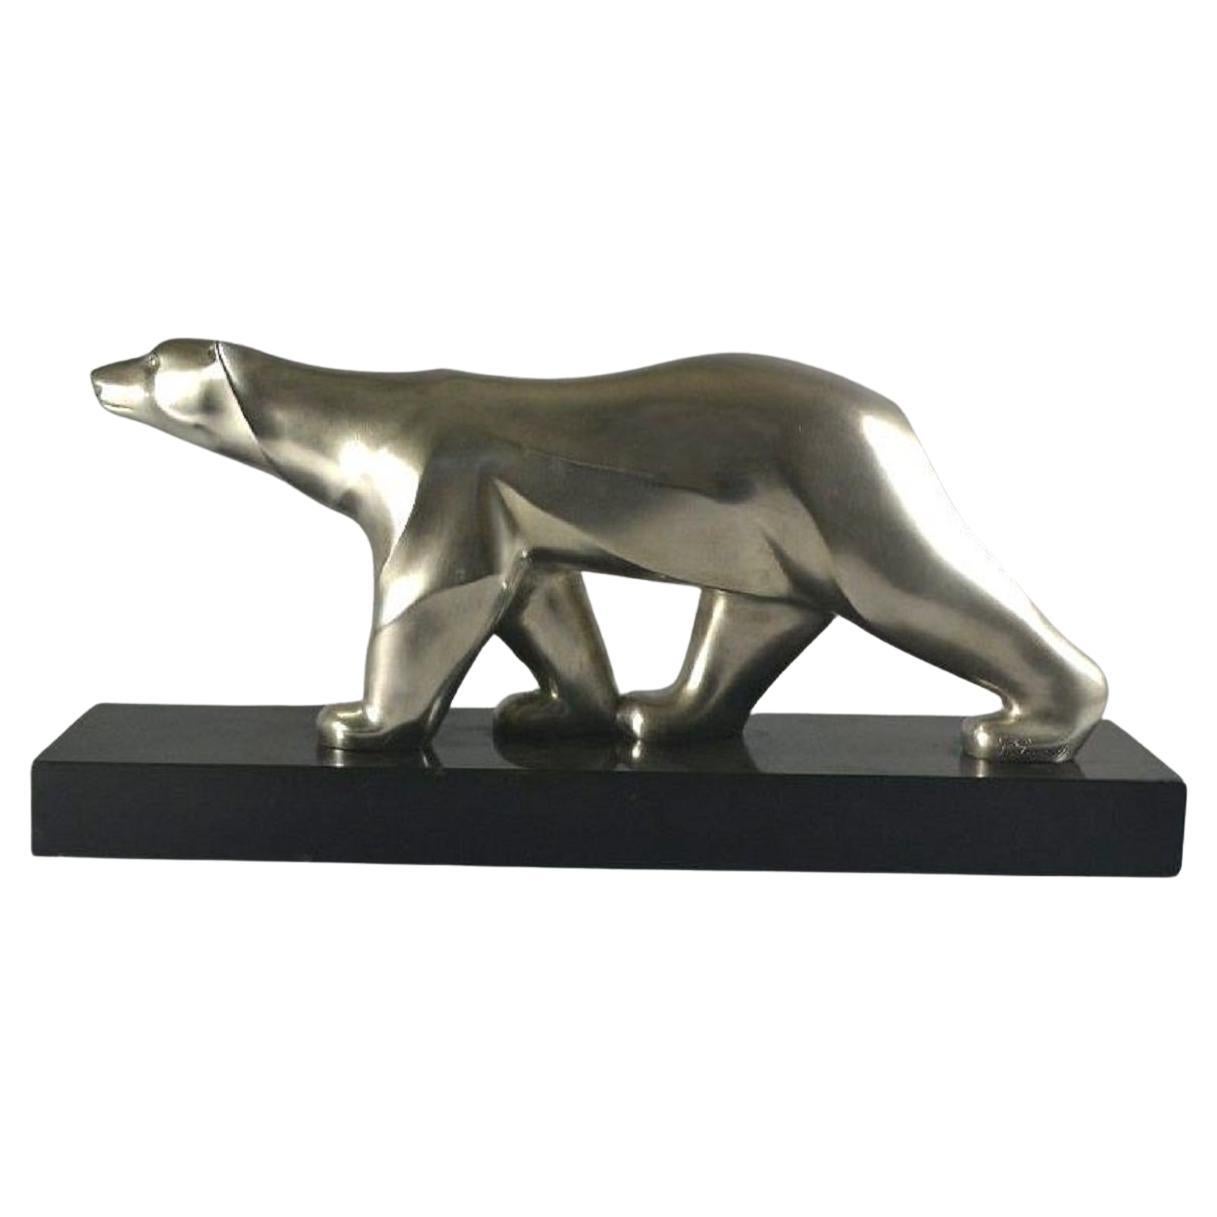 Superb Silvered patinated Bronze Polar Bear Sculpture by George Lavroff mounted on a solid black marble base, modelled in the Art Deco style. Circa 1930s.

Condition: Perfect showroom condition with no imperfections. Signed George Lavroff and